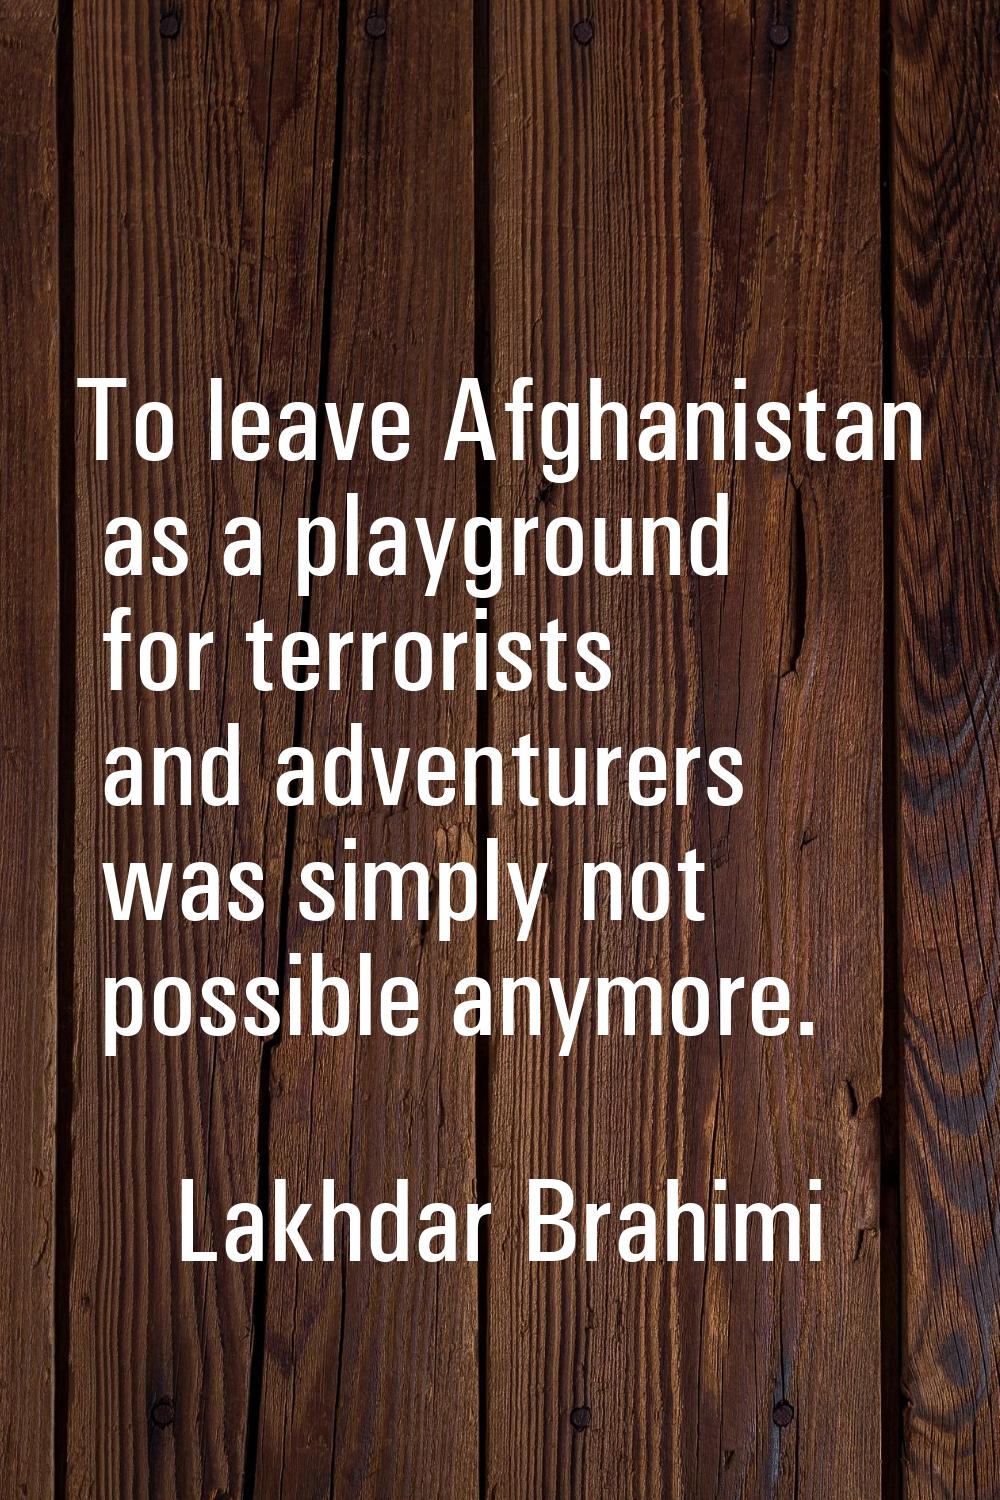 To leave Afghanistan as a playground for terrorists and adventurers was simply not possible anymore